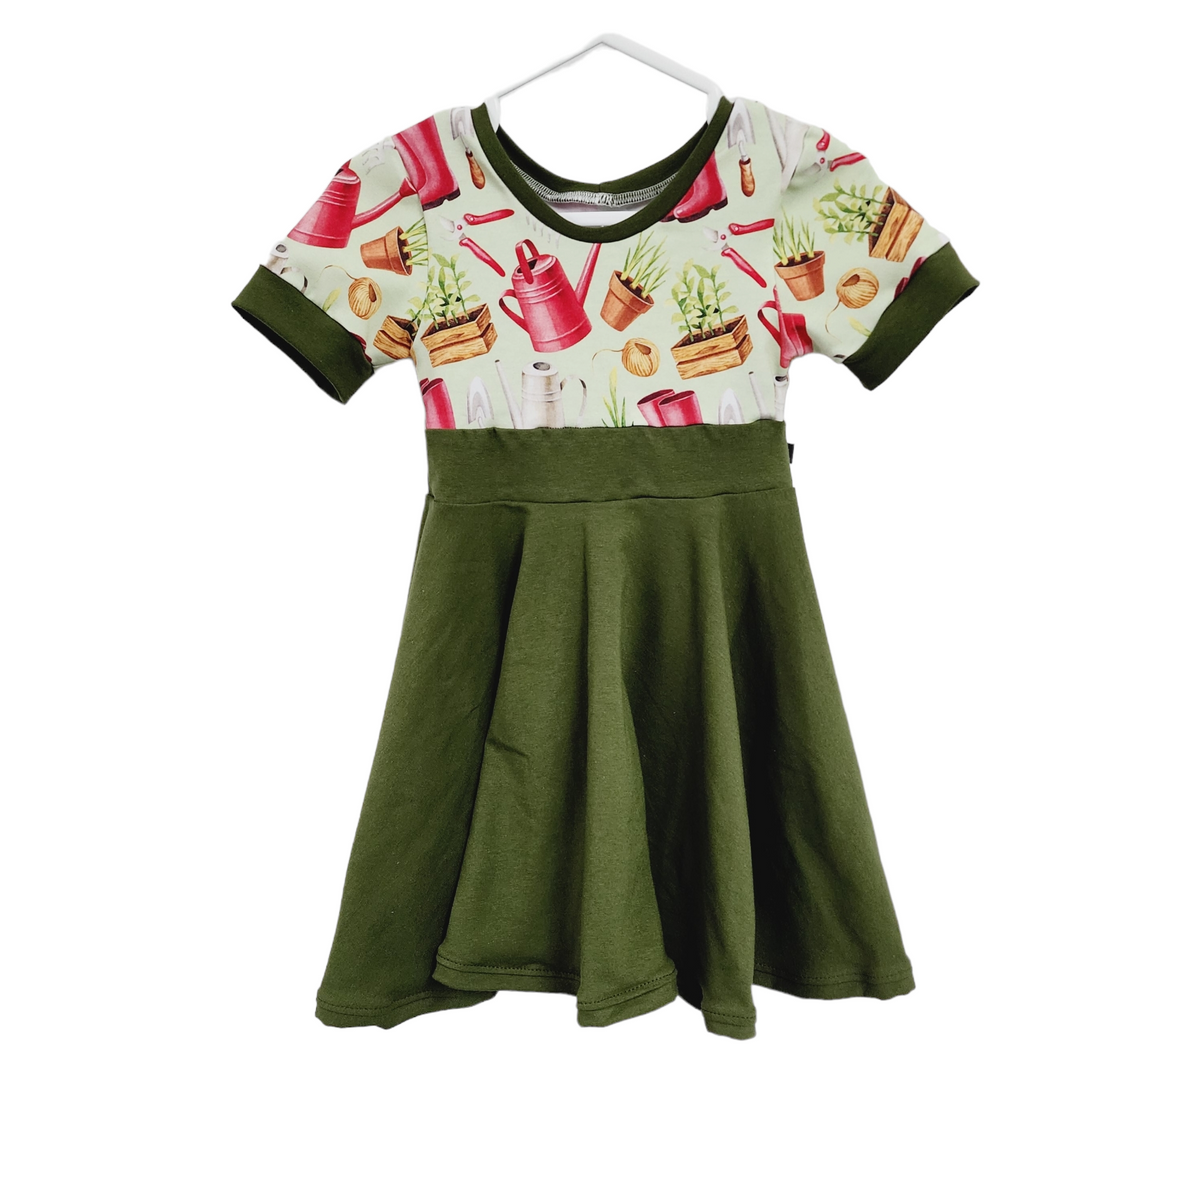 M3 Creations | Grow-with-me dress  | Janette Jardine (pre-order)